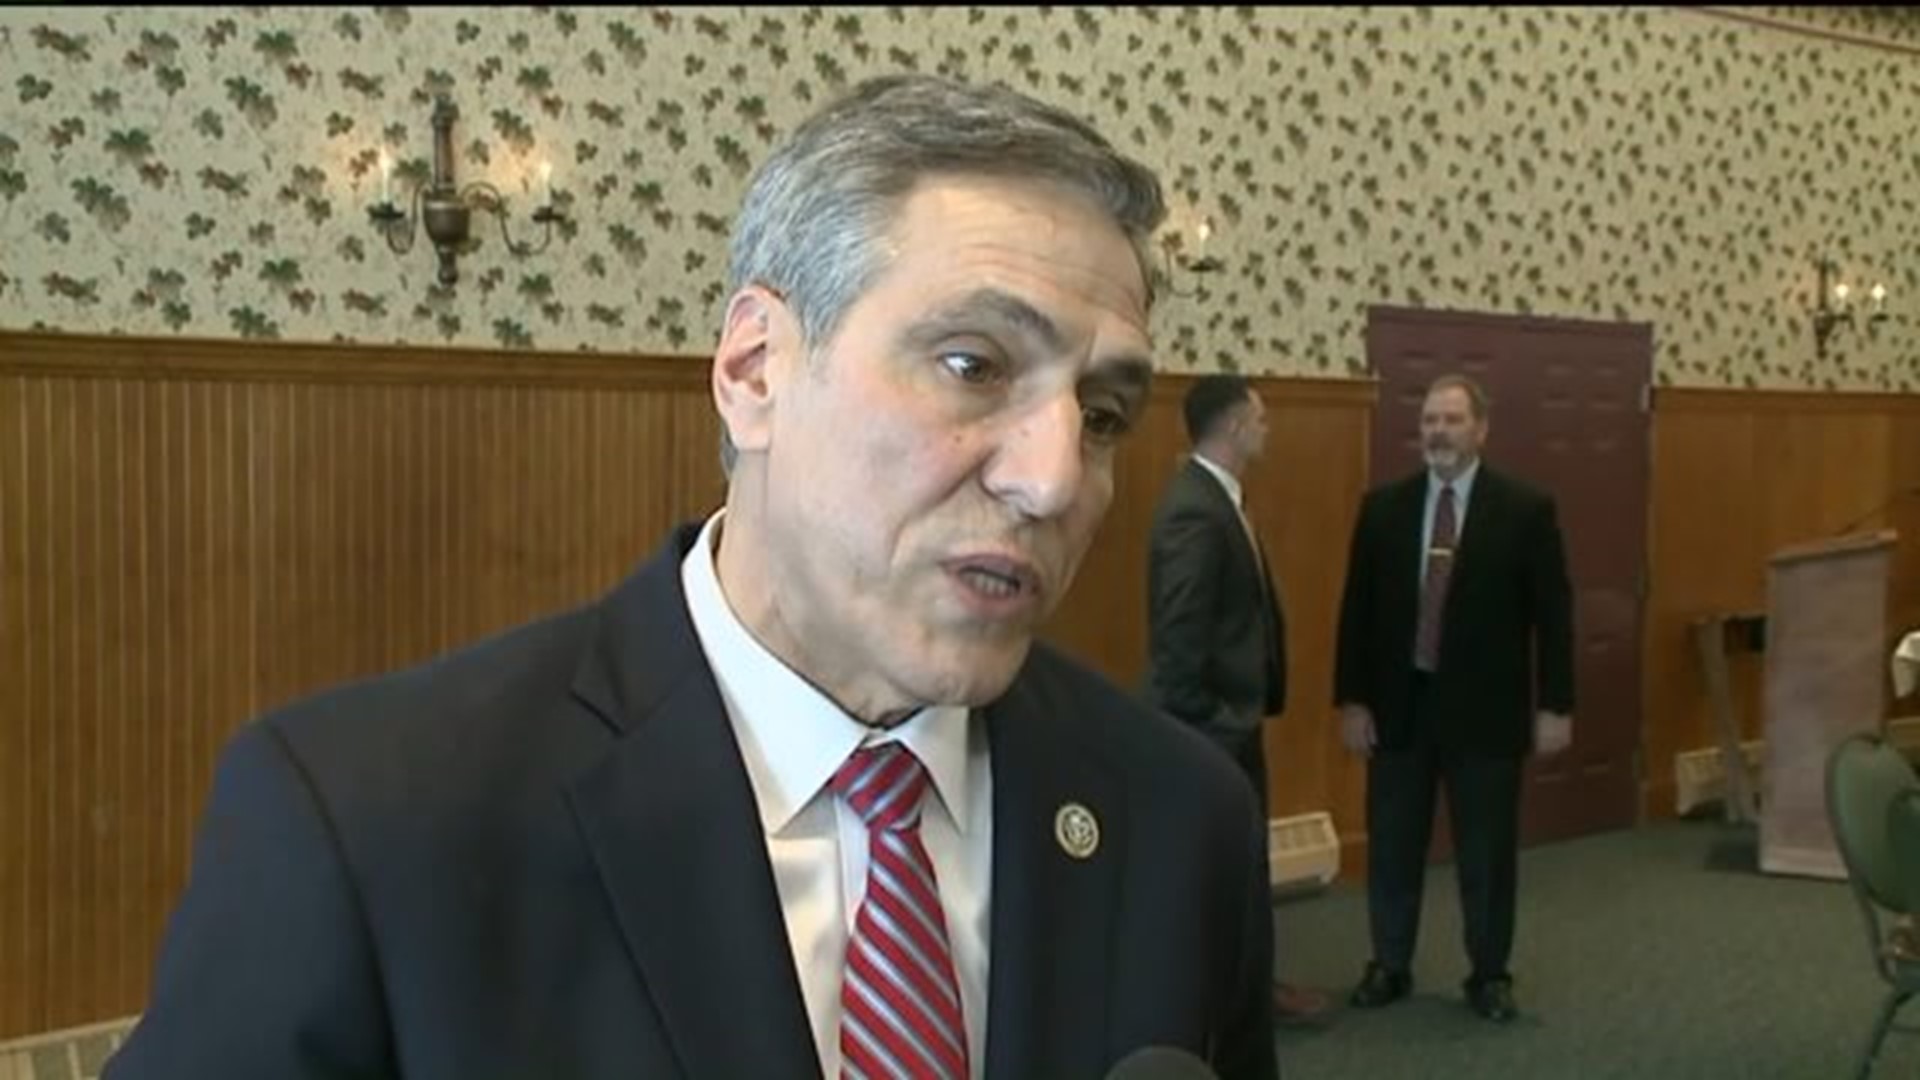 Barletta Speaks at Chamber Breakfast While People Protest Outside